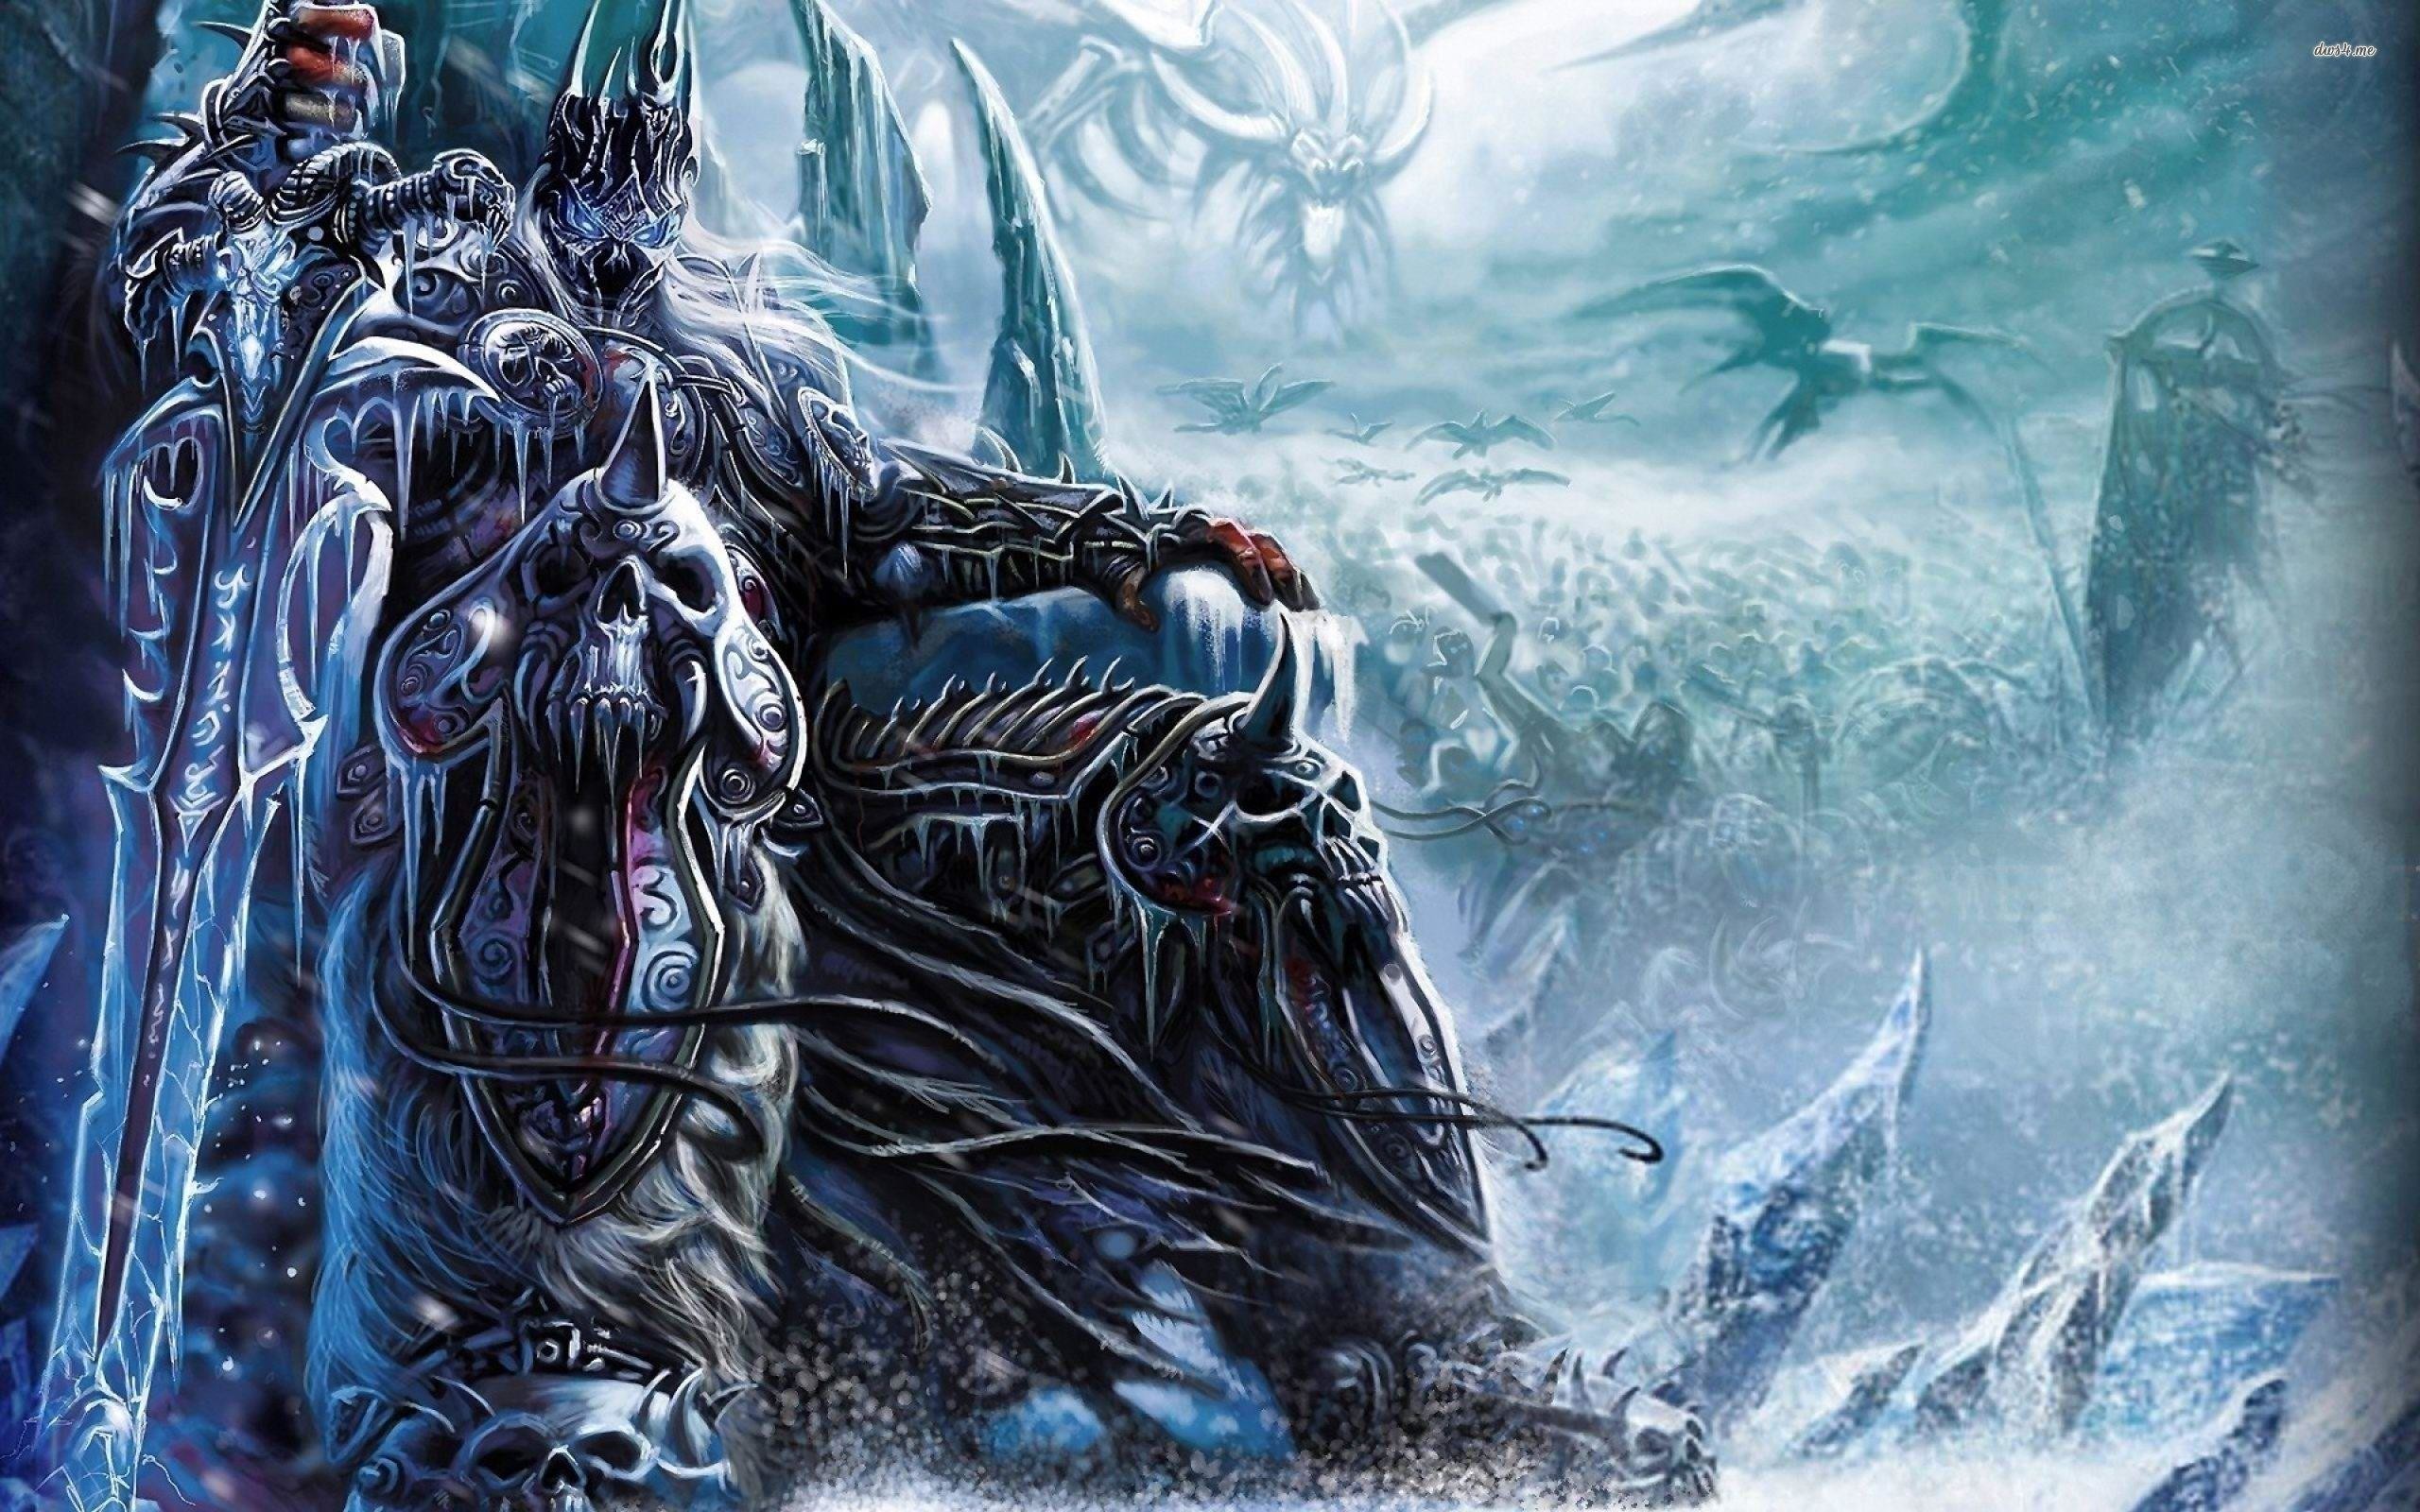 2560x1600 Lich King - World of Warcraft - Wrath of the Lich King wallpaper .